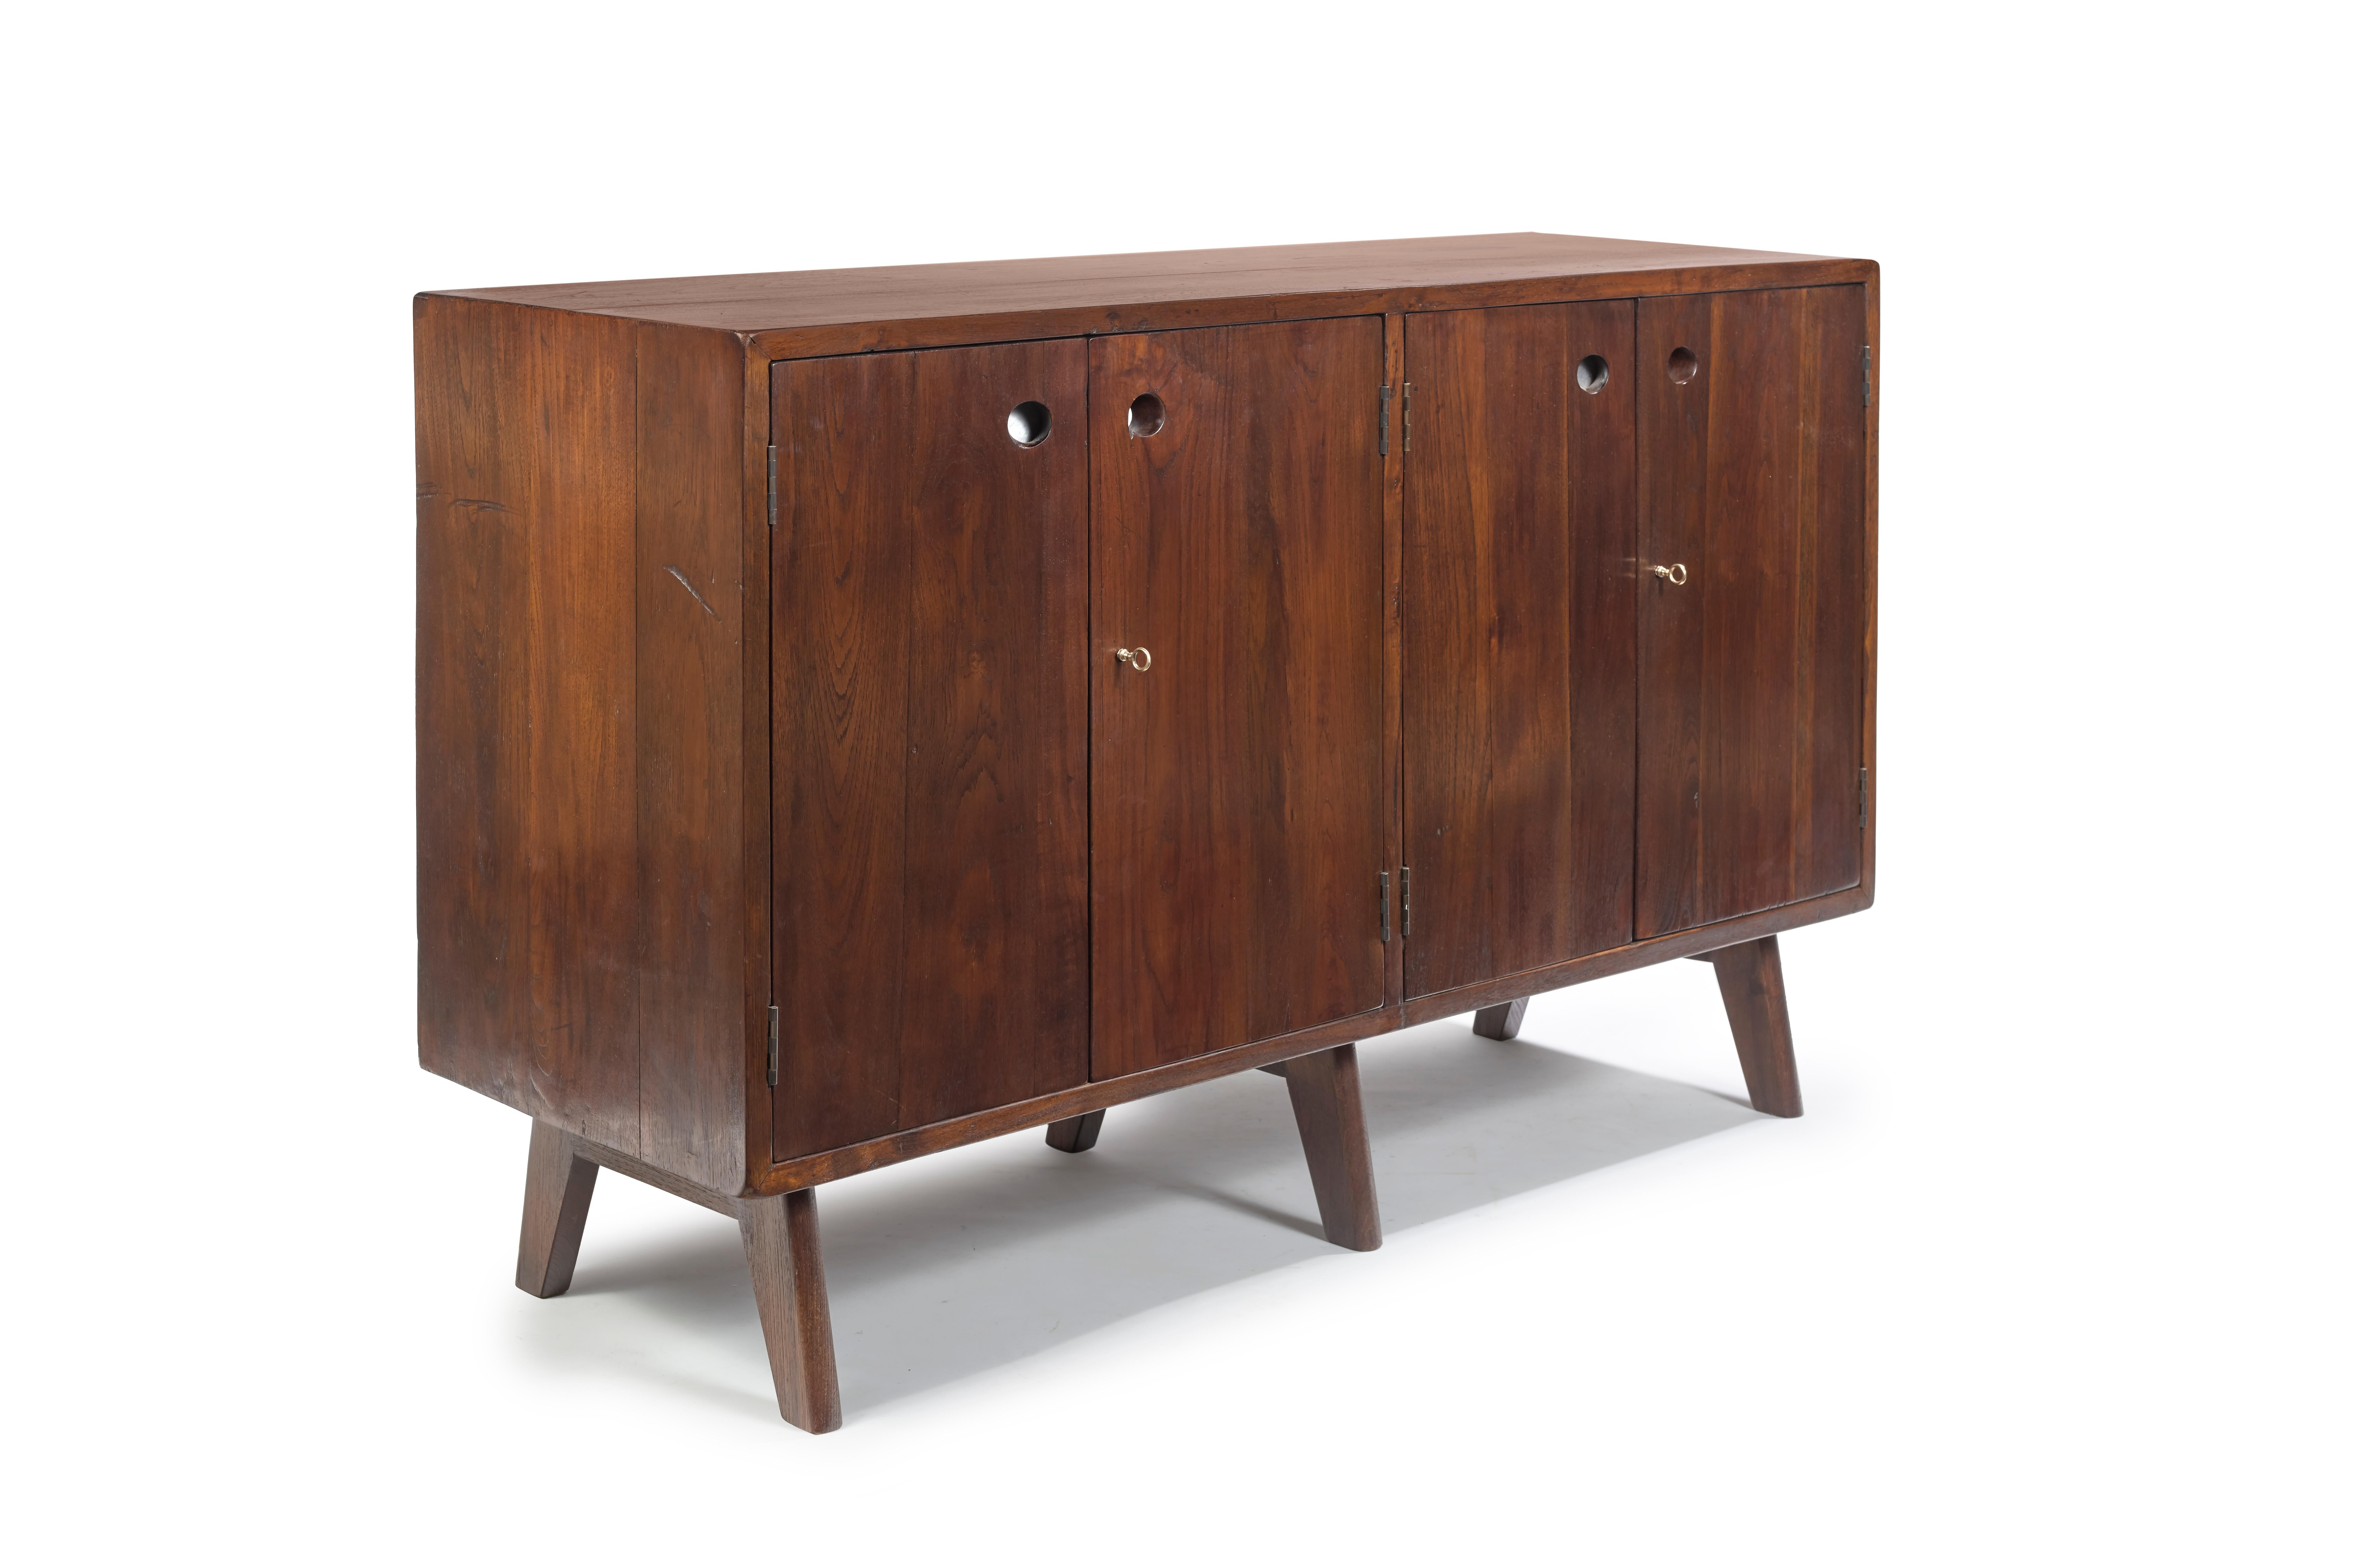 Pierre JEANNERET (1896-1967)
Inde

Storage unit, ref. PJ-R-14-A, c. 1957-58
Variant with three short bridge type legs under the frame with four doors with aluminium backed grips.
Solid teak wood.
Secretariat (1958). Various admin.